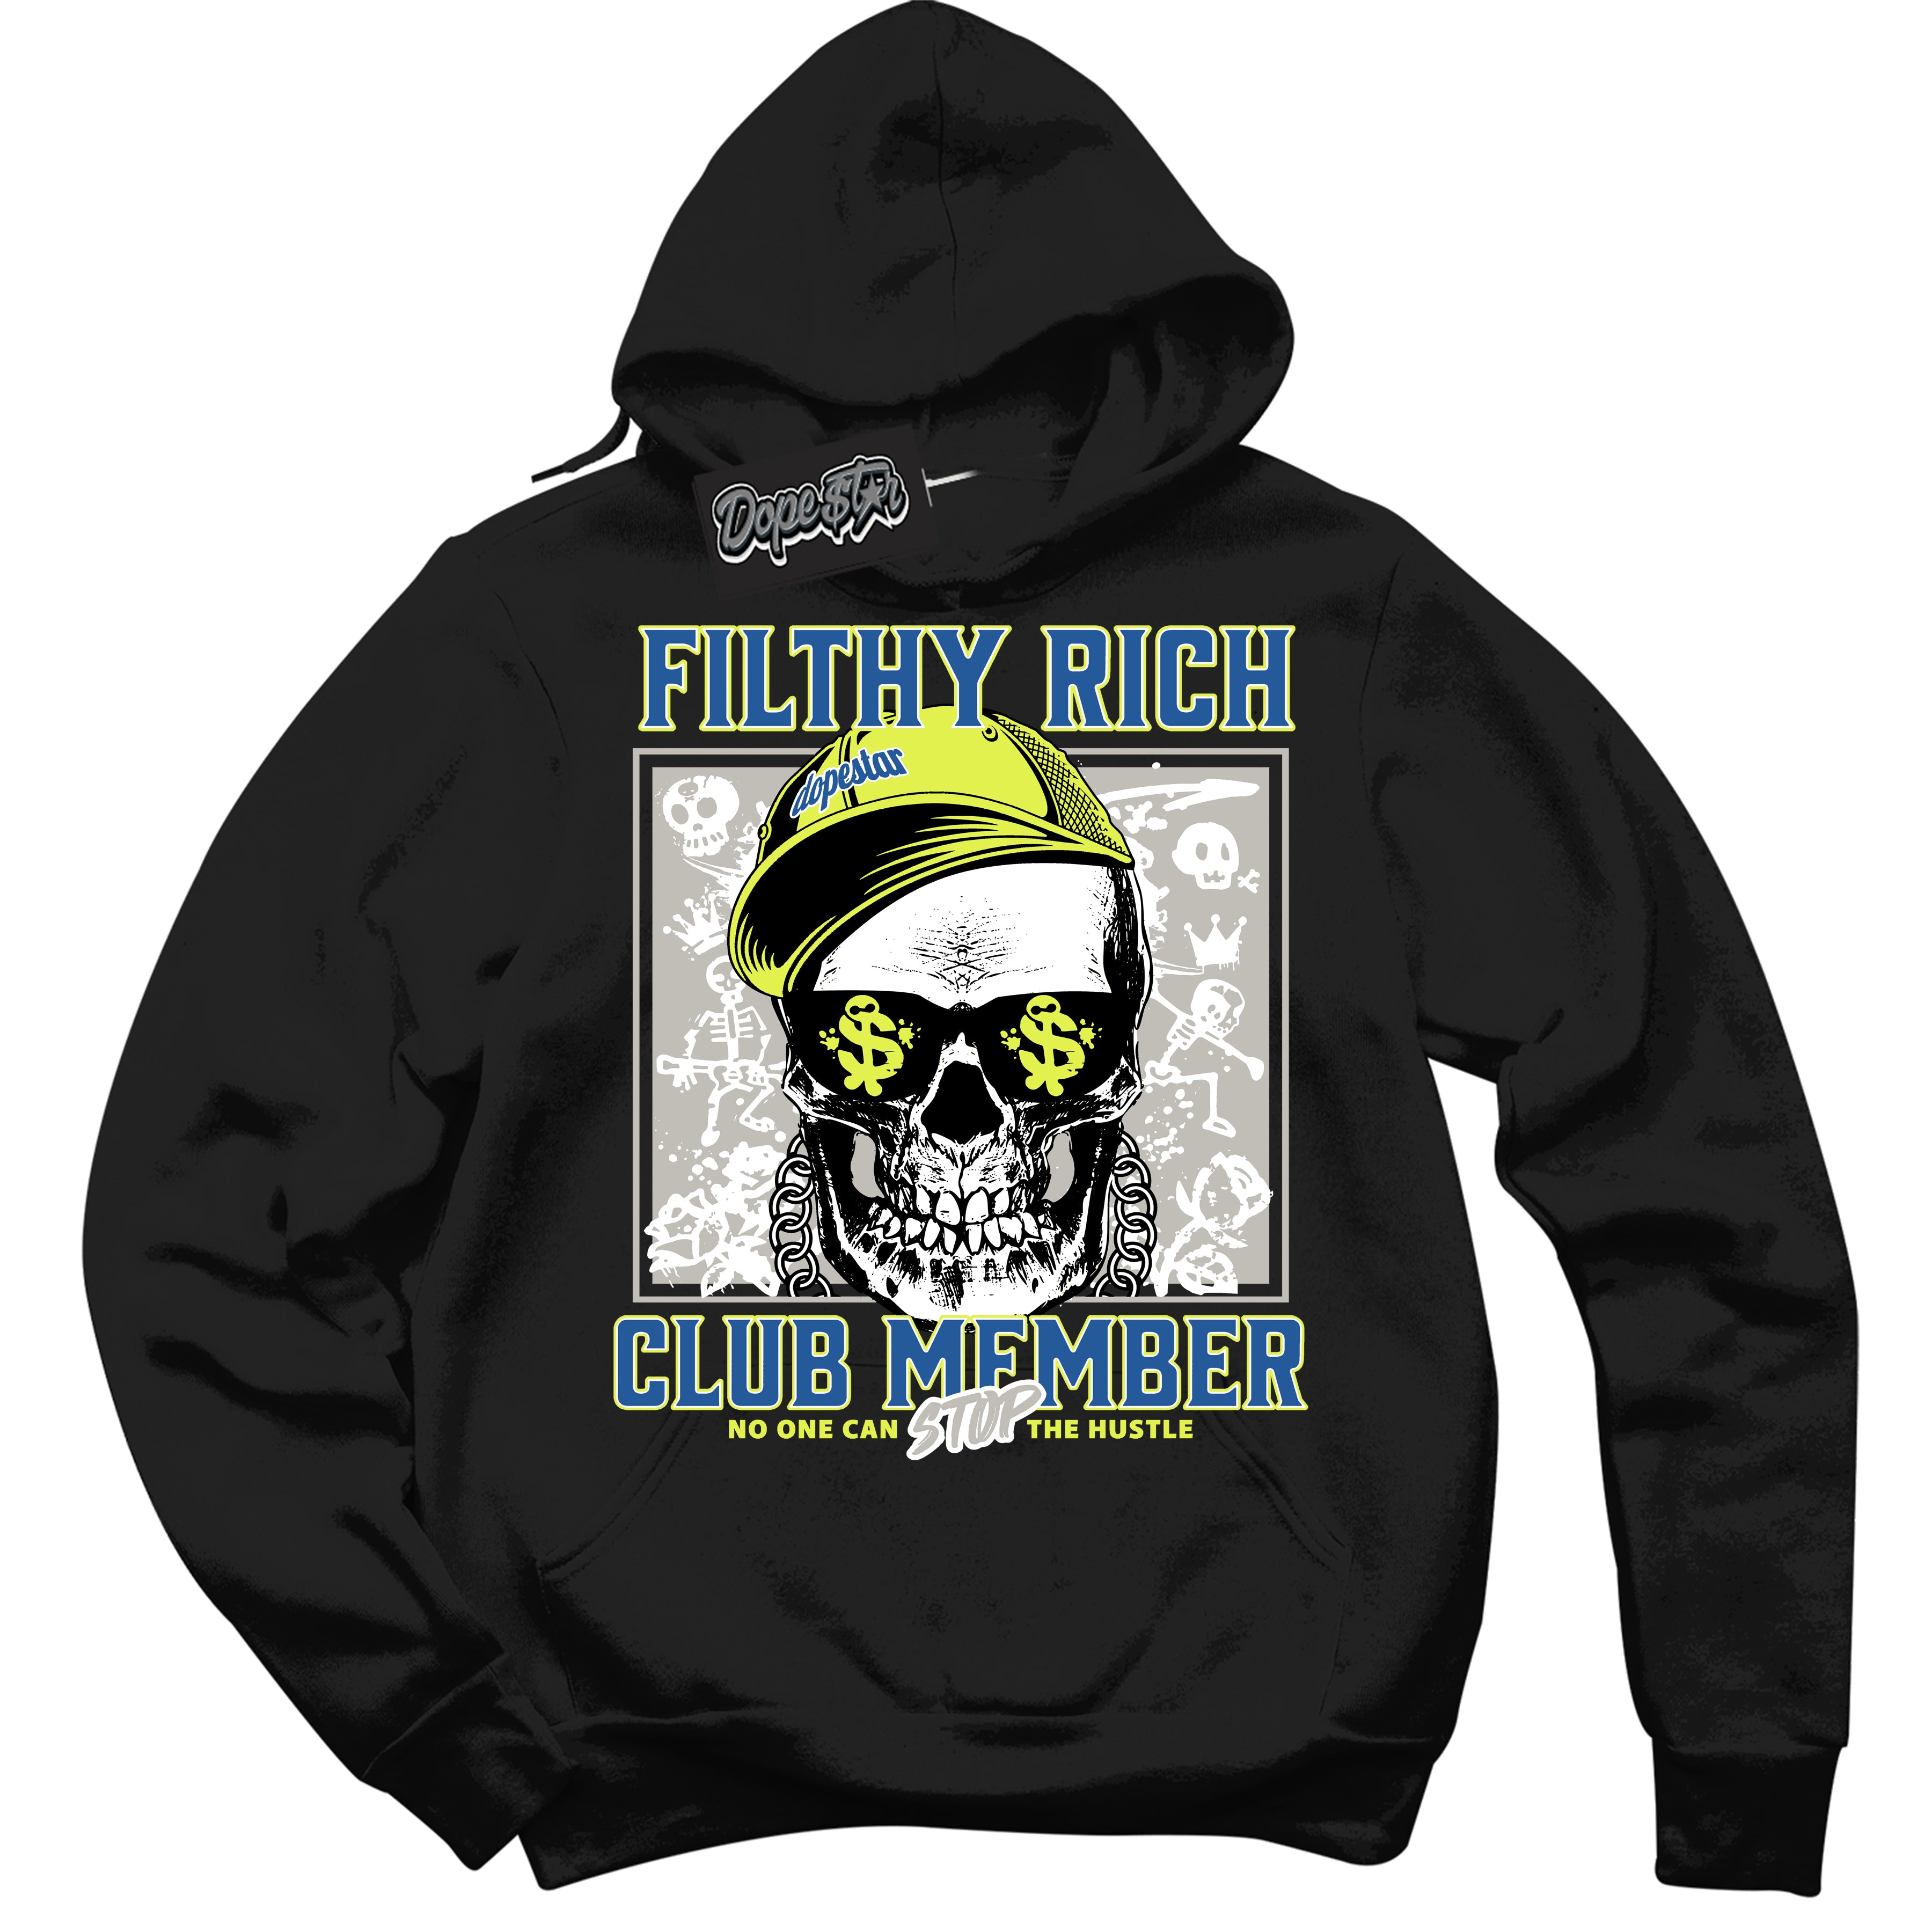 Cool Black Hoodie with “ Filthy Rich ”  design that Perfectly Matches '86 Air Max Day 1s Sneakers.